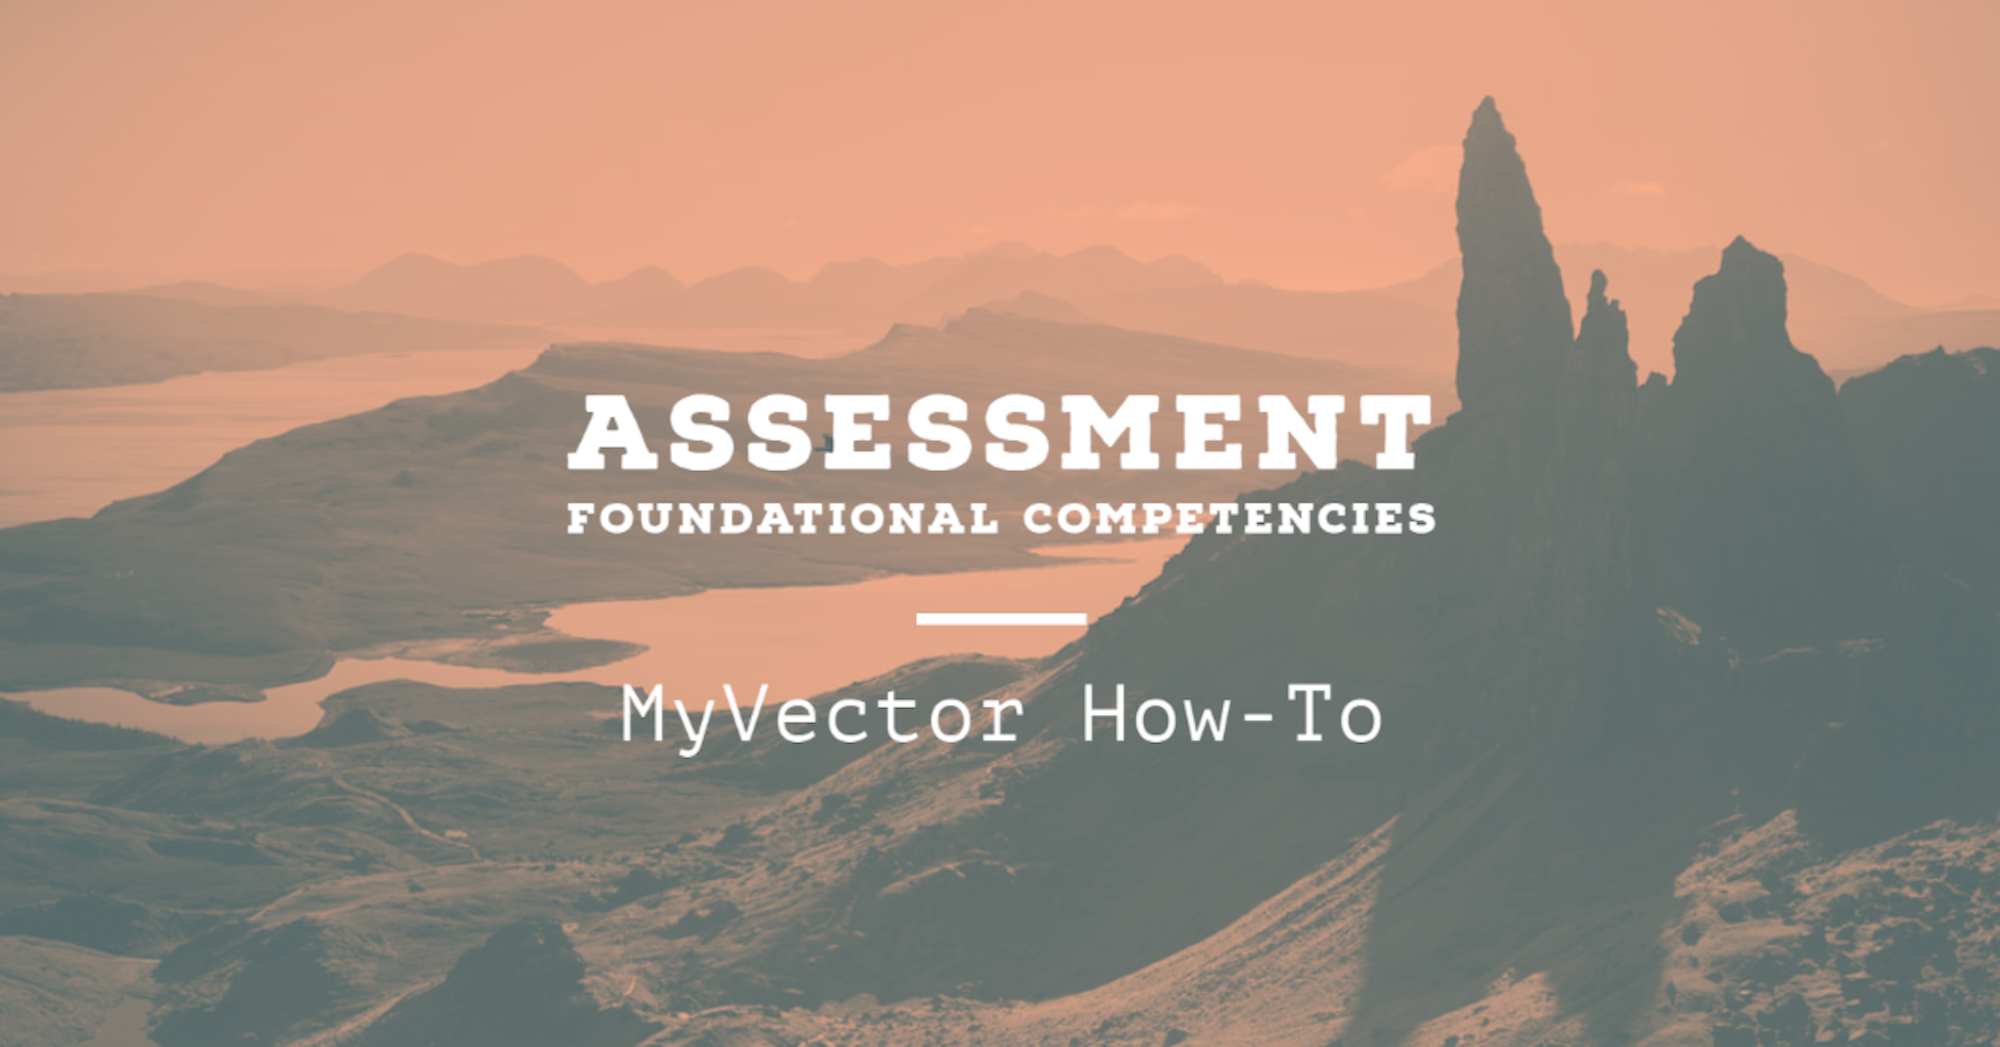 Graphic for the video on how to access foundational competencies on MyVector